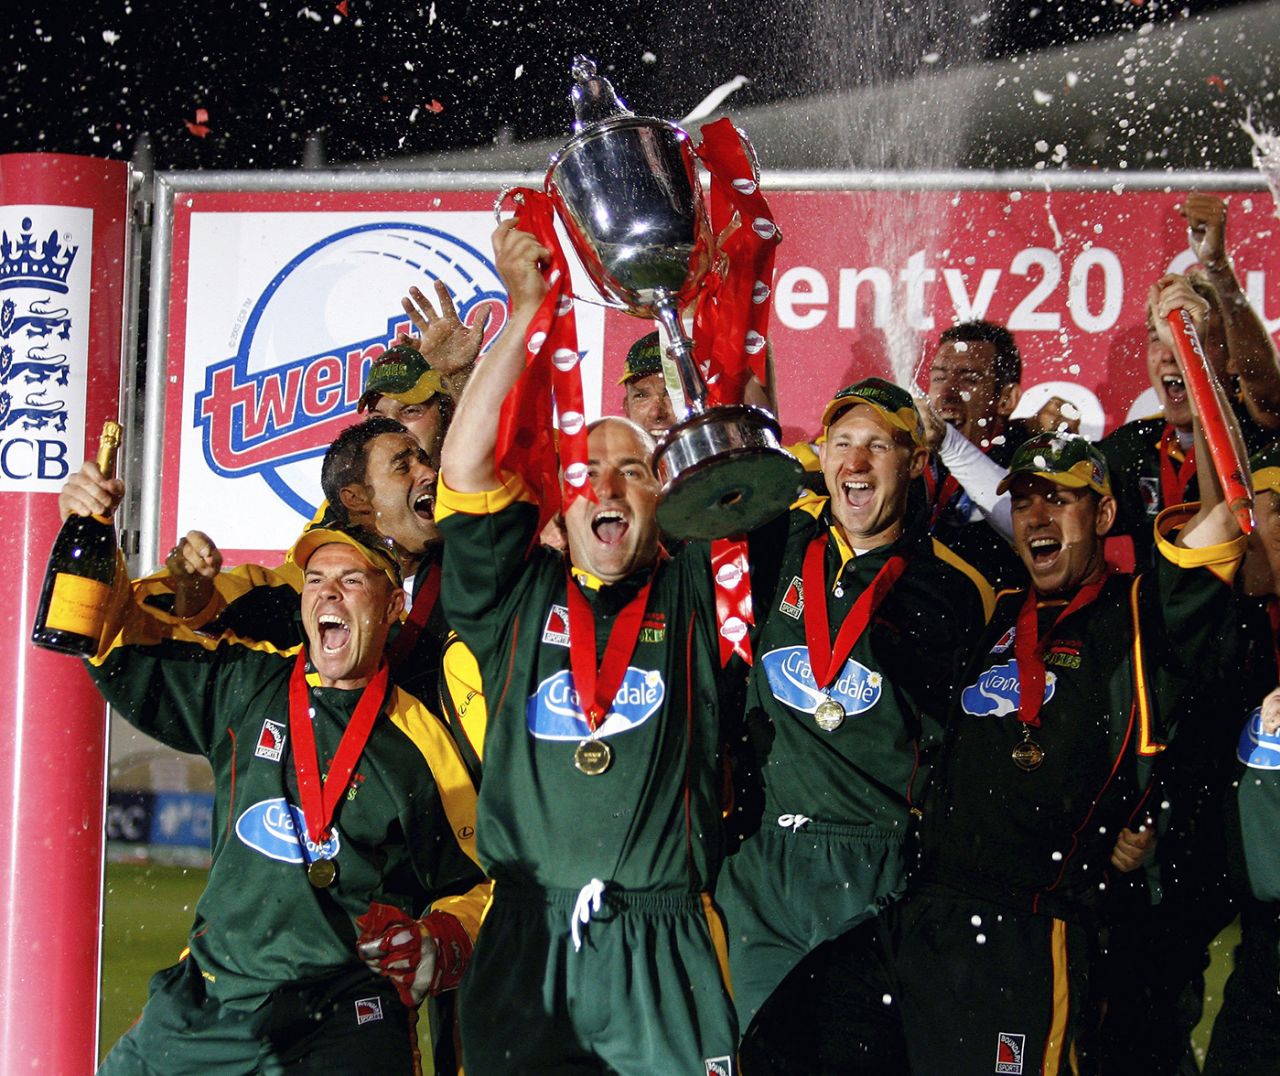 Jeremy Snape captained Leicestershire to the Twenty20 Cup in 2006, Nottinghamshire v Leicestershire, Twenty20 Final, Trent Bridge, August 12, 2006